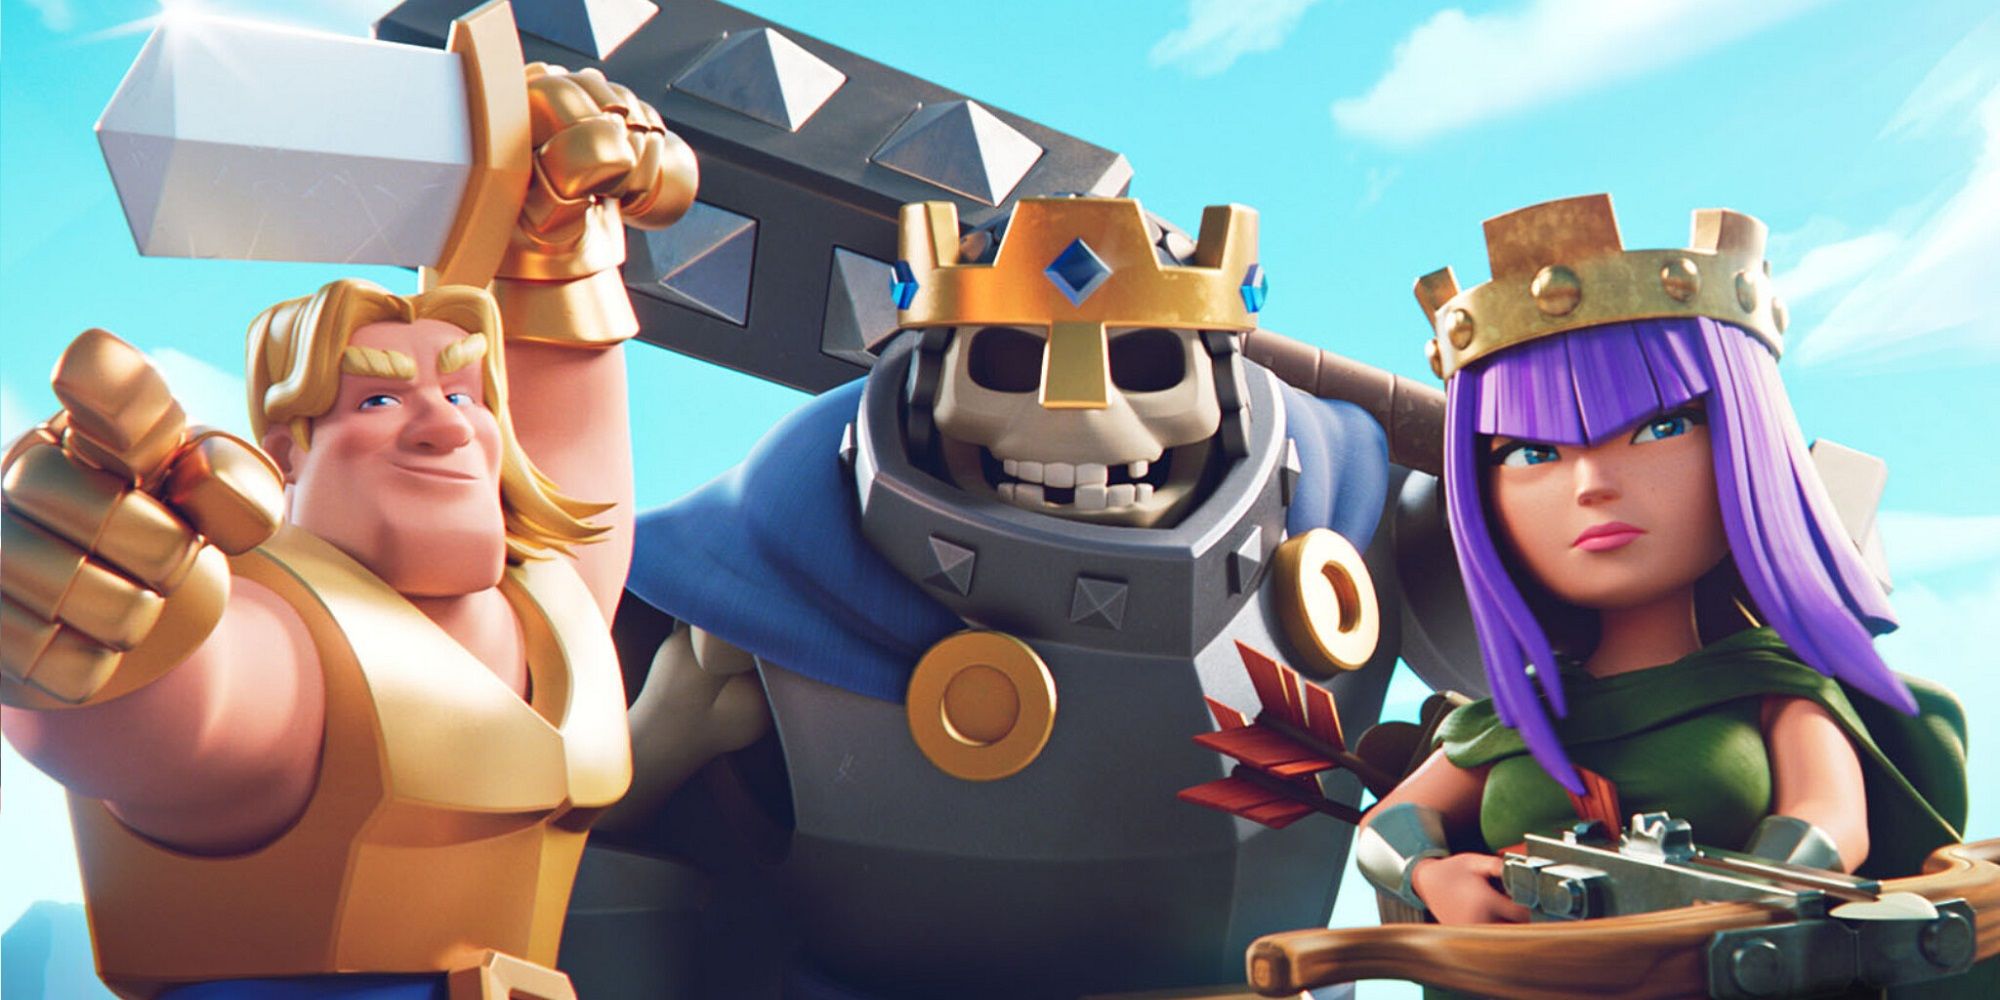 Clash Royale: Golden Knight left, Skeleton King middle, Archer Queen right.